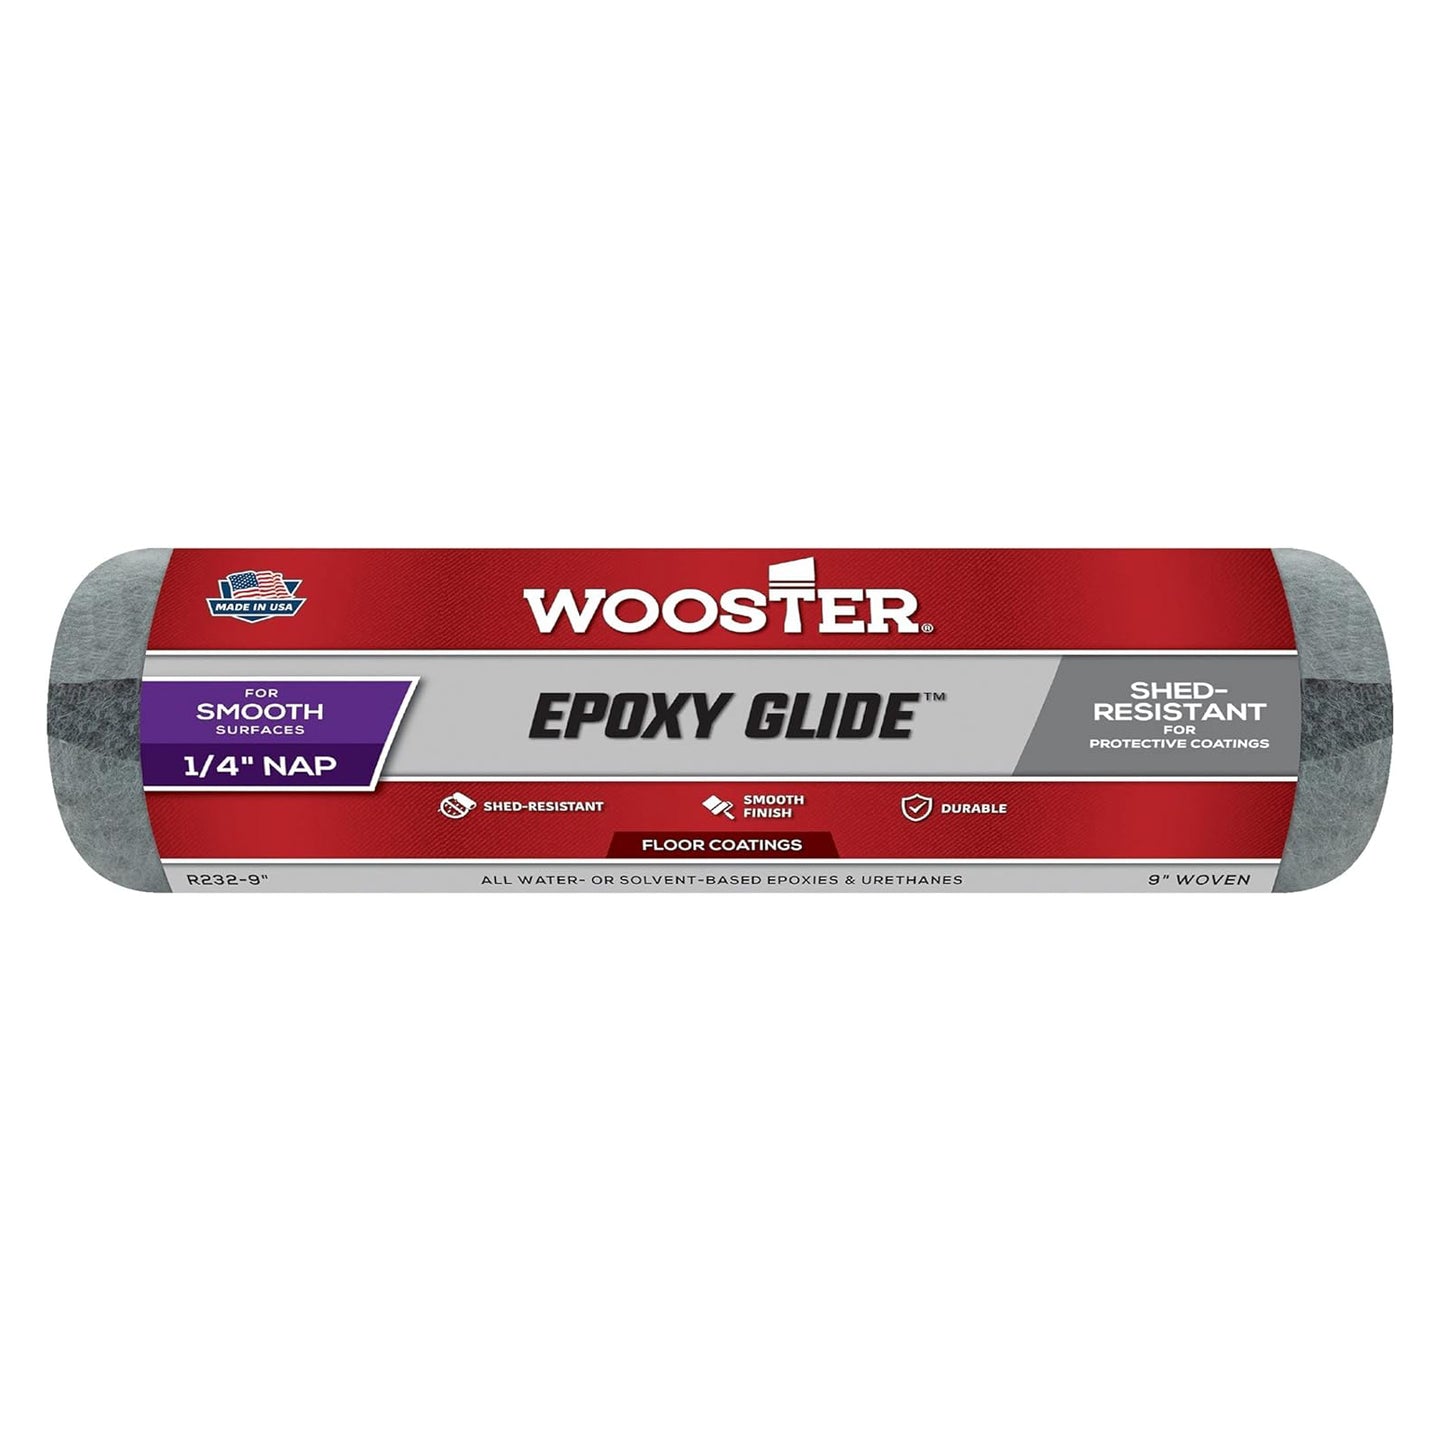 Wooster Epoxy Glide Roller Cover - 1/4